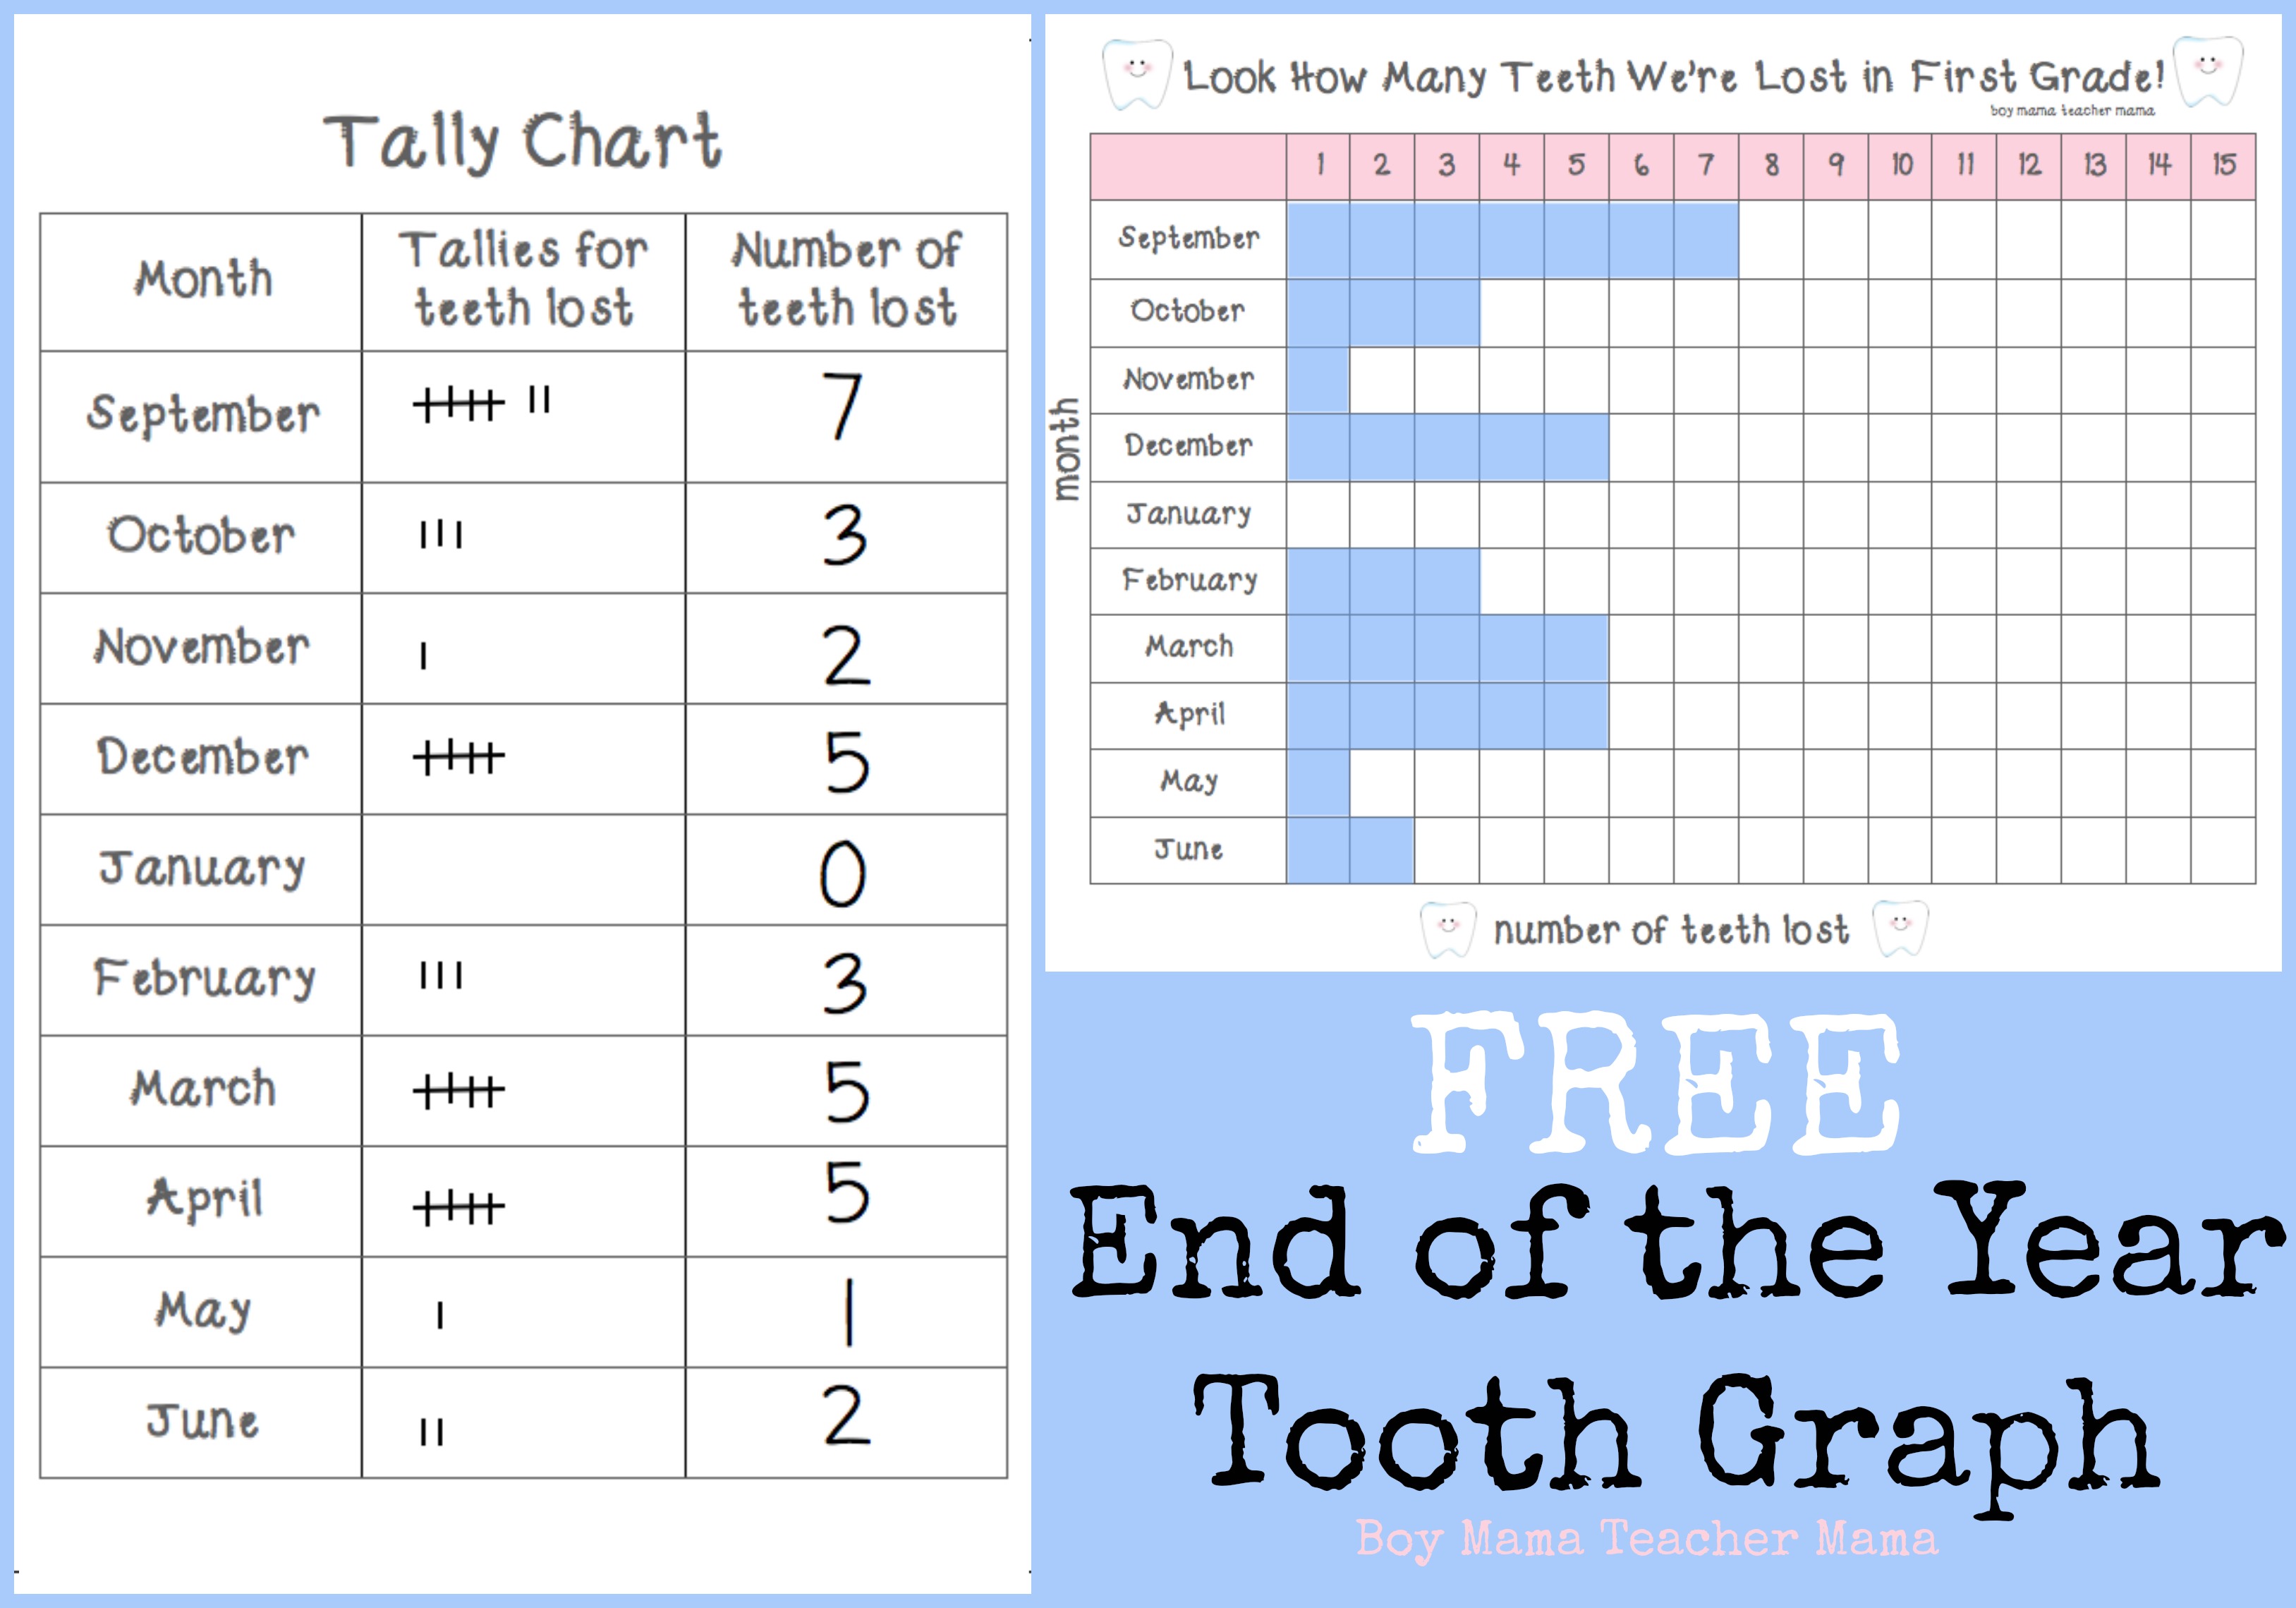 Boy Mama Teacher Mama FREE End of the Year Tooth Graph (featured).jpg